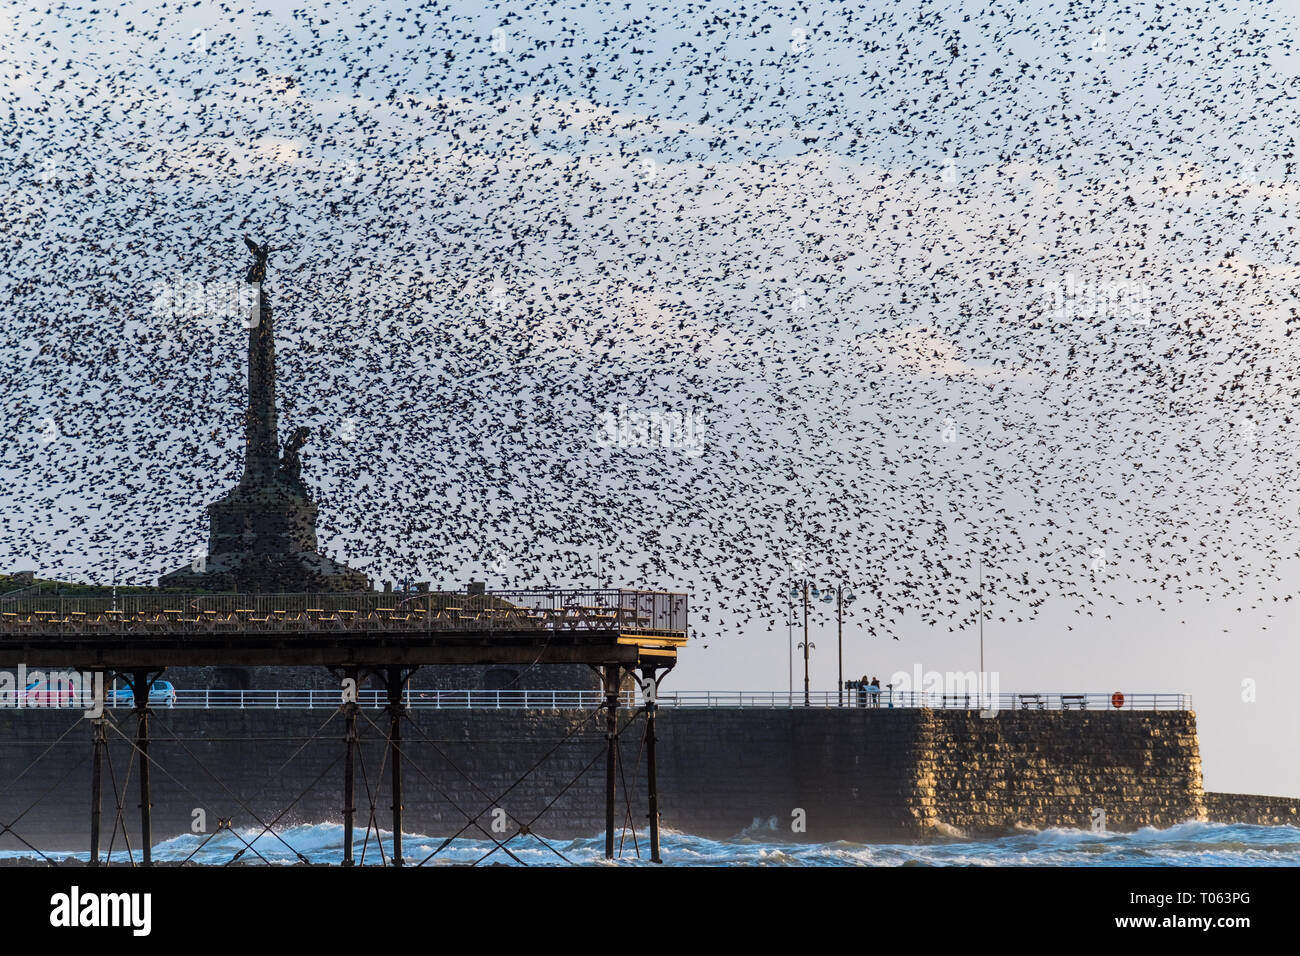 Aberystwyth, UK. 17th Mar, 2019. Tens of thousands of starlings perform their nightly balletic murmurations in the sky around Aberystwyth's distinctive war memorial  as the day draws to an end. The migratory birds are coming to the end of their winter sojourn and will soon fly off to return to their breeding grounds in Scandinavia for the summer. Aberystwythis one of the few urban roosts in the country and draws people from all over the UK to witness the spectacular nightly displays between October and March.   Credit: keith morris/Alamy Live News Stock Photo